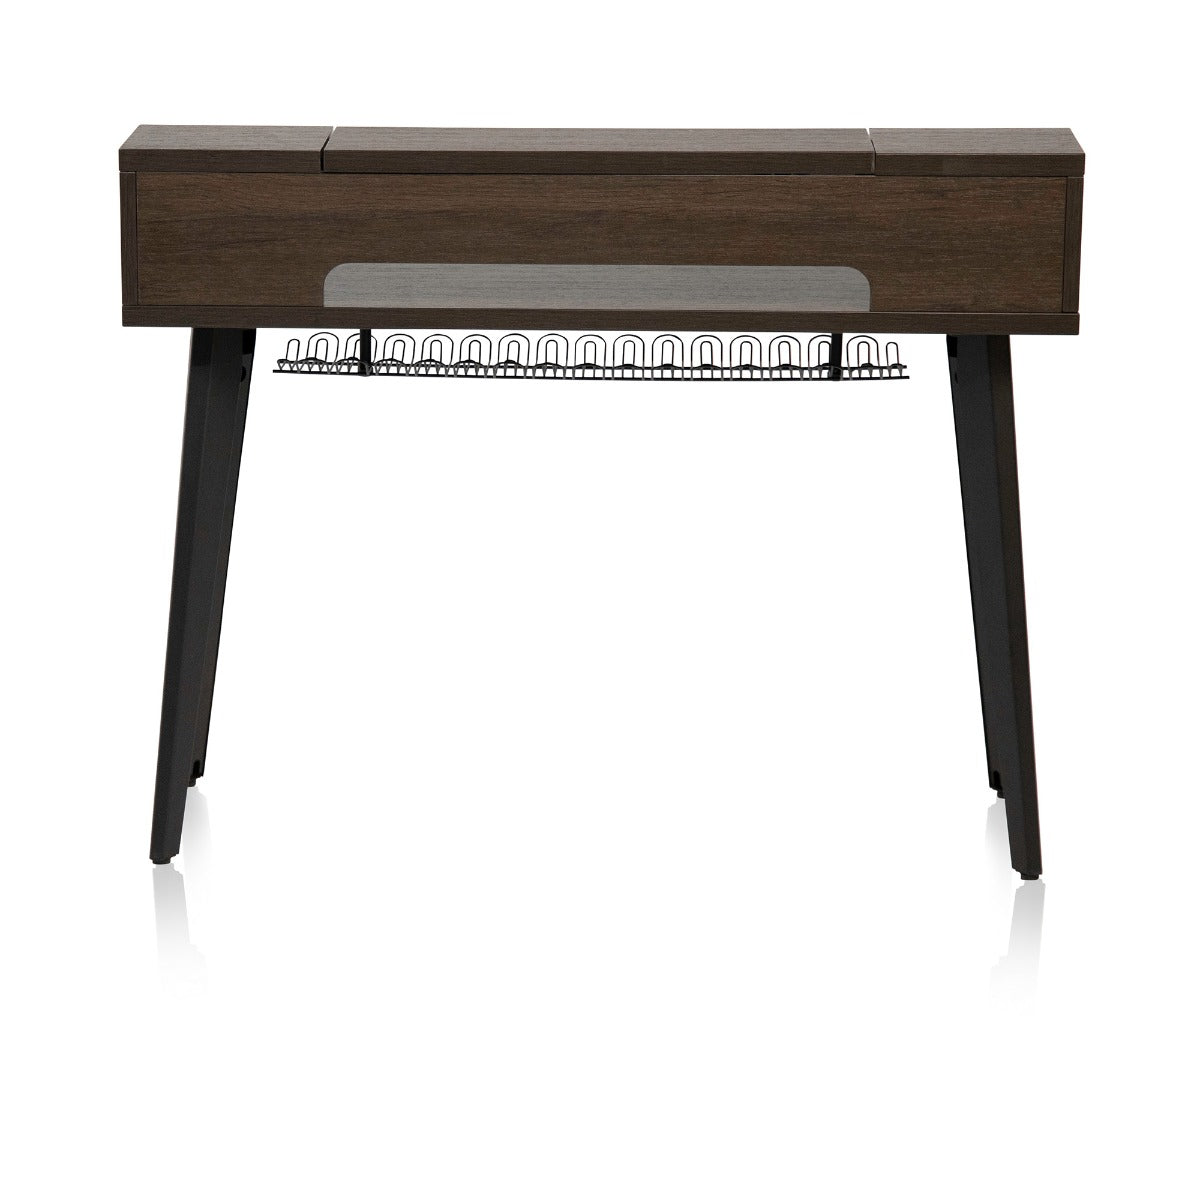 Image of the back of the Elite Furniture Series 61-Note Keyboard Desk 